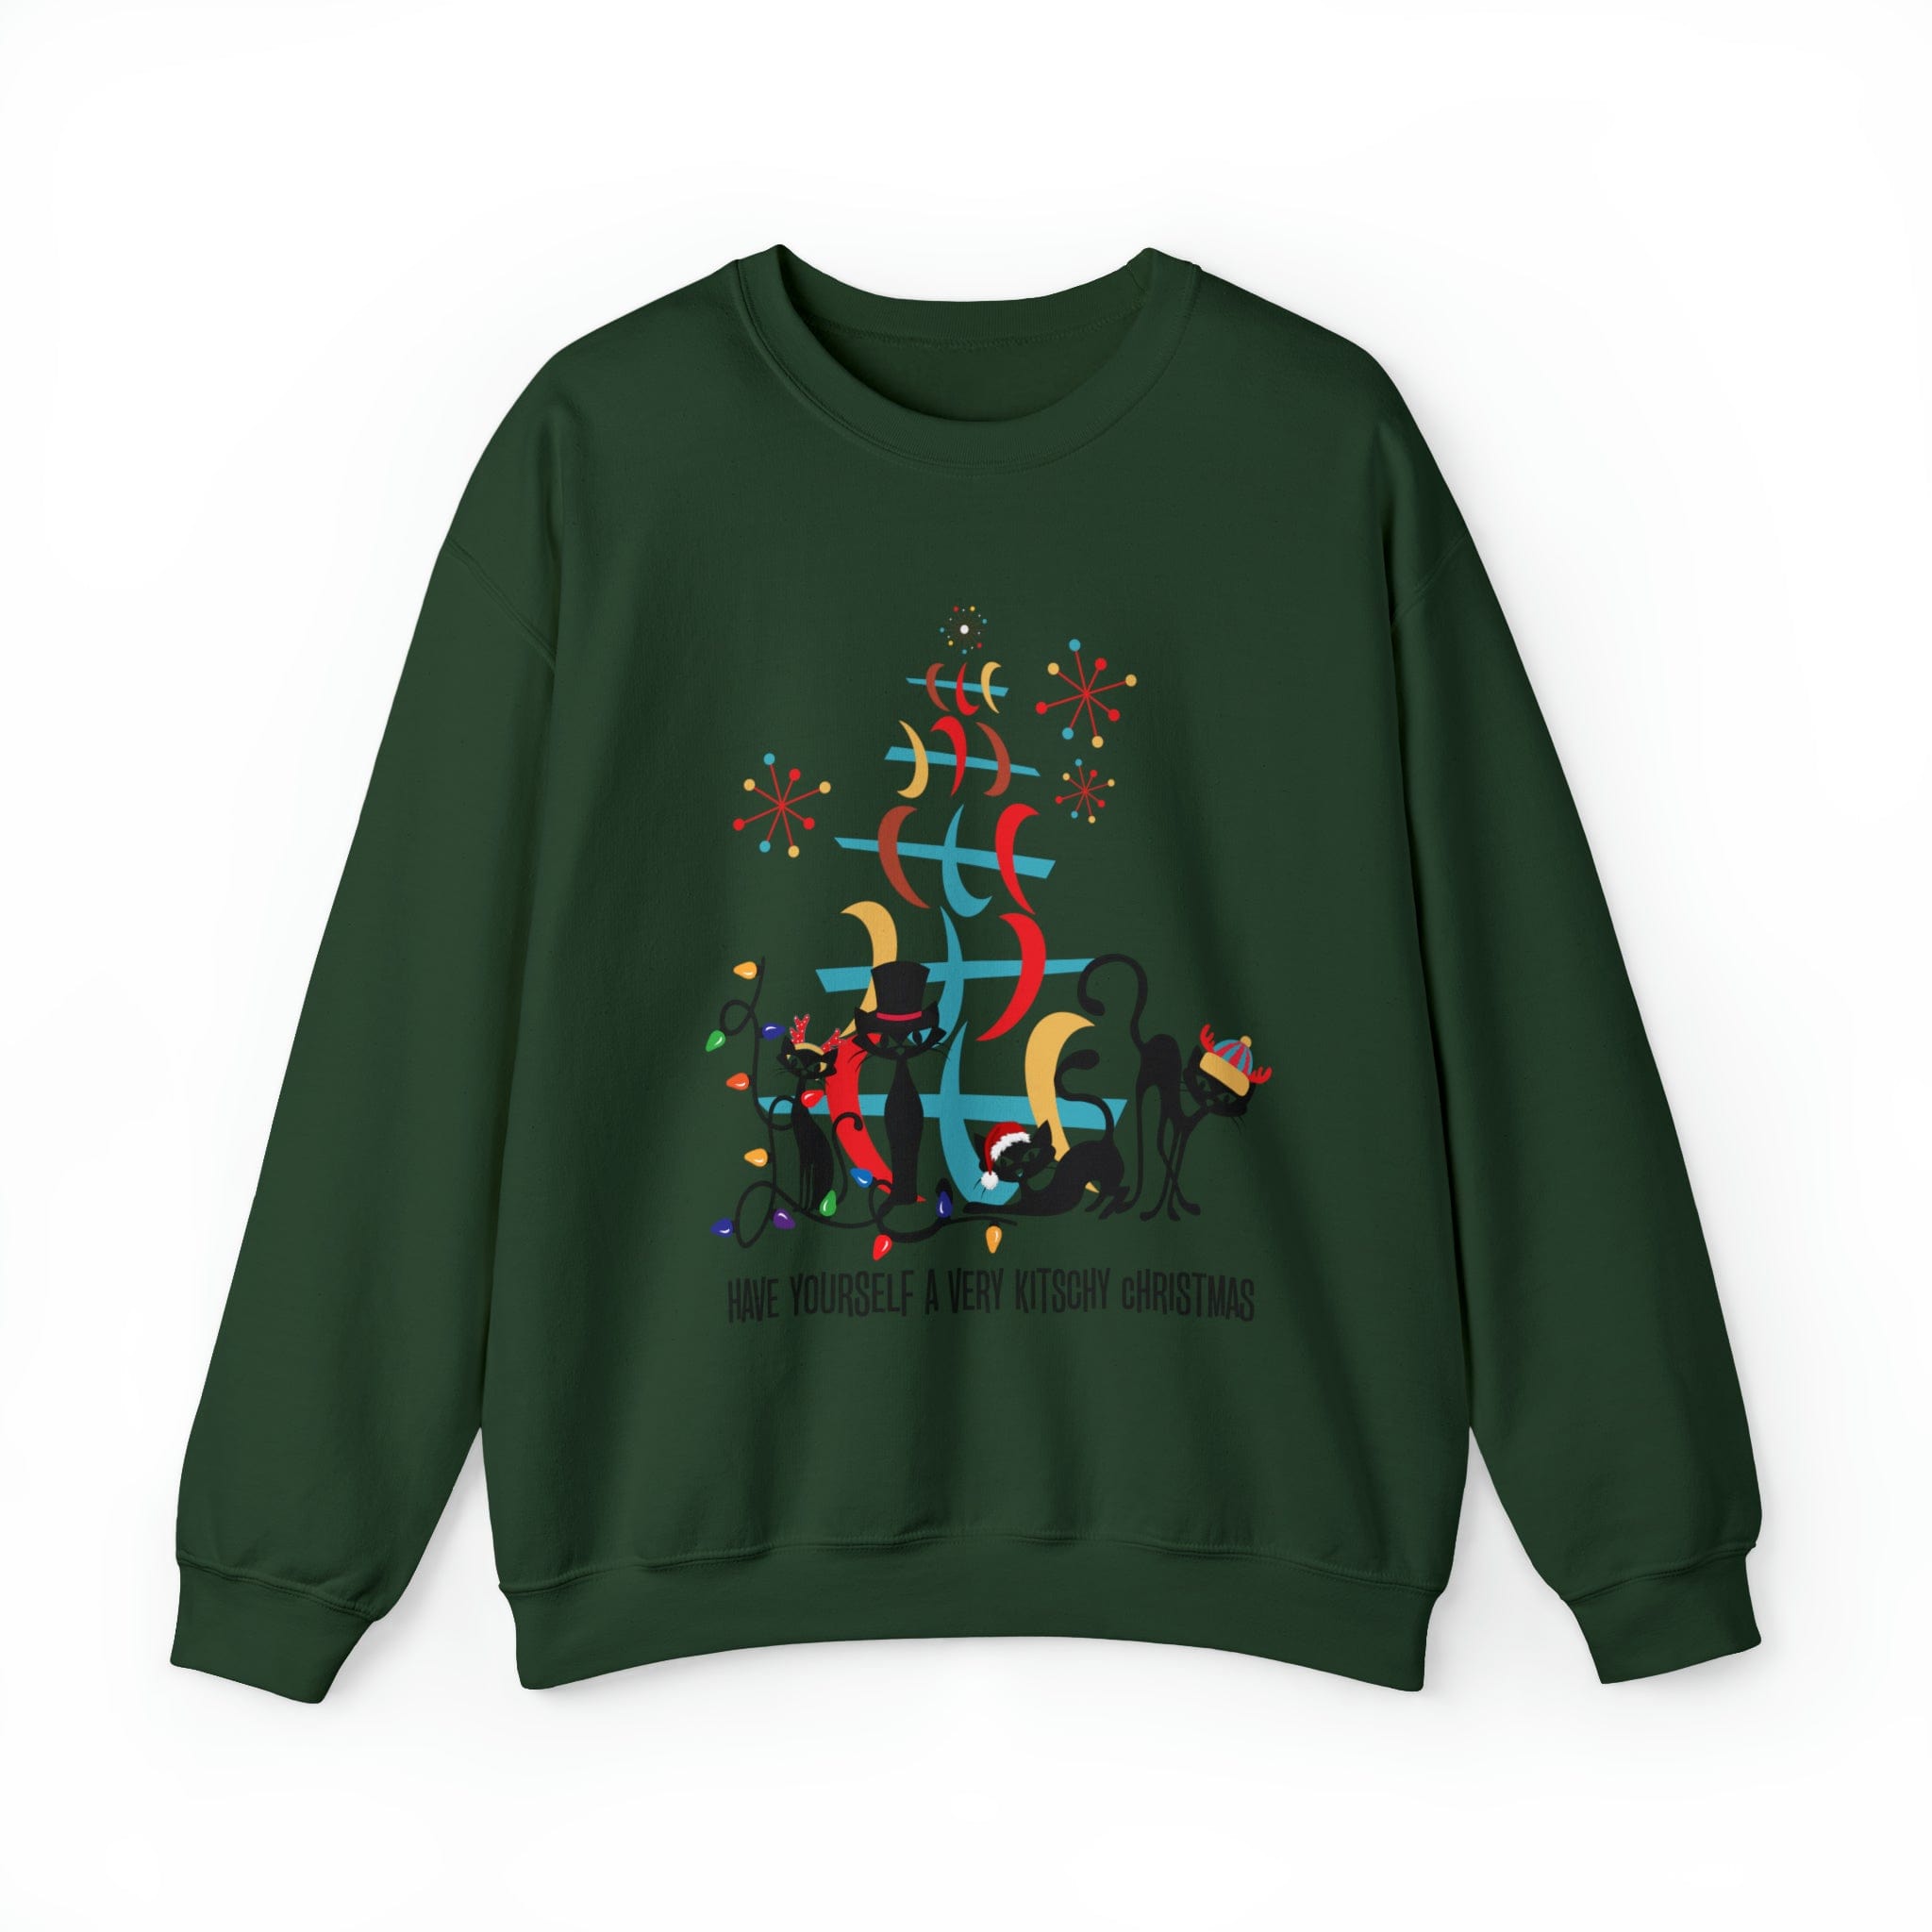 Atomic Cat Christmas Sweater, Have Yourself A Very Kitschy Christmas Cozy Loose Fit, Sweatshirt Sweatshirt S / Forest Green